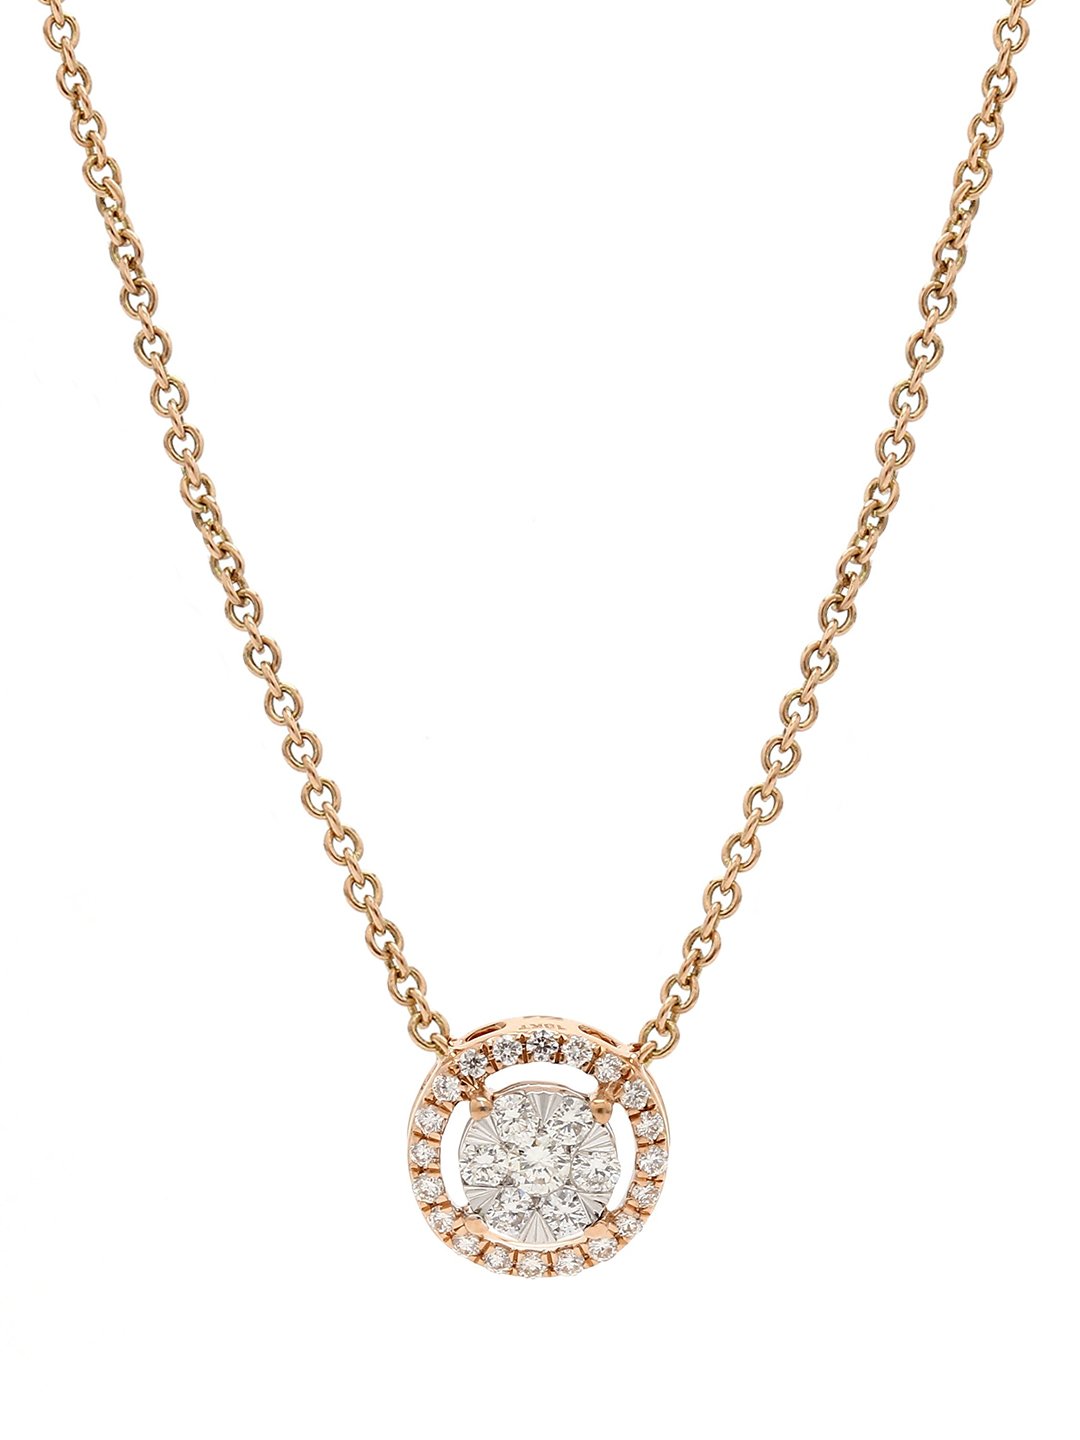 Real Diamond Illussion Solitaire Pendant With Diamonds by the yard Chain - Zest Mélange 